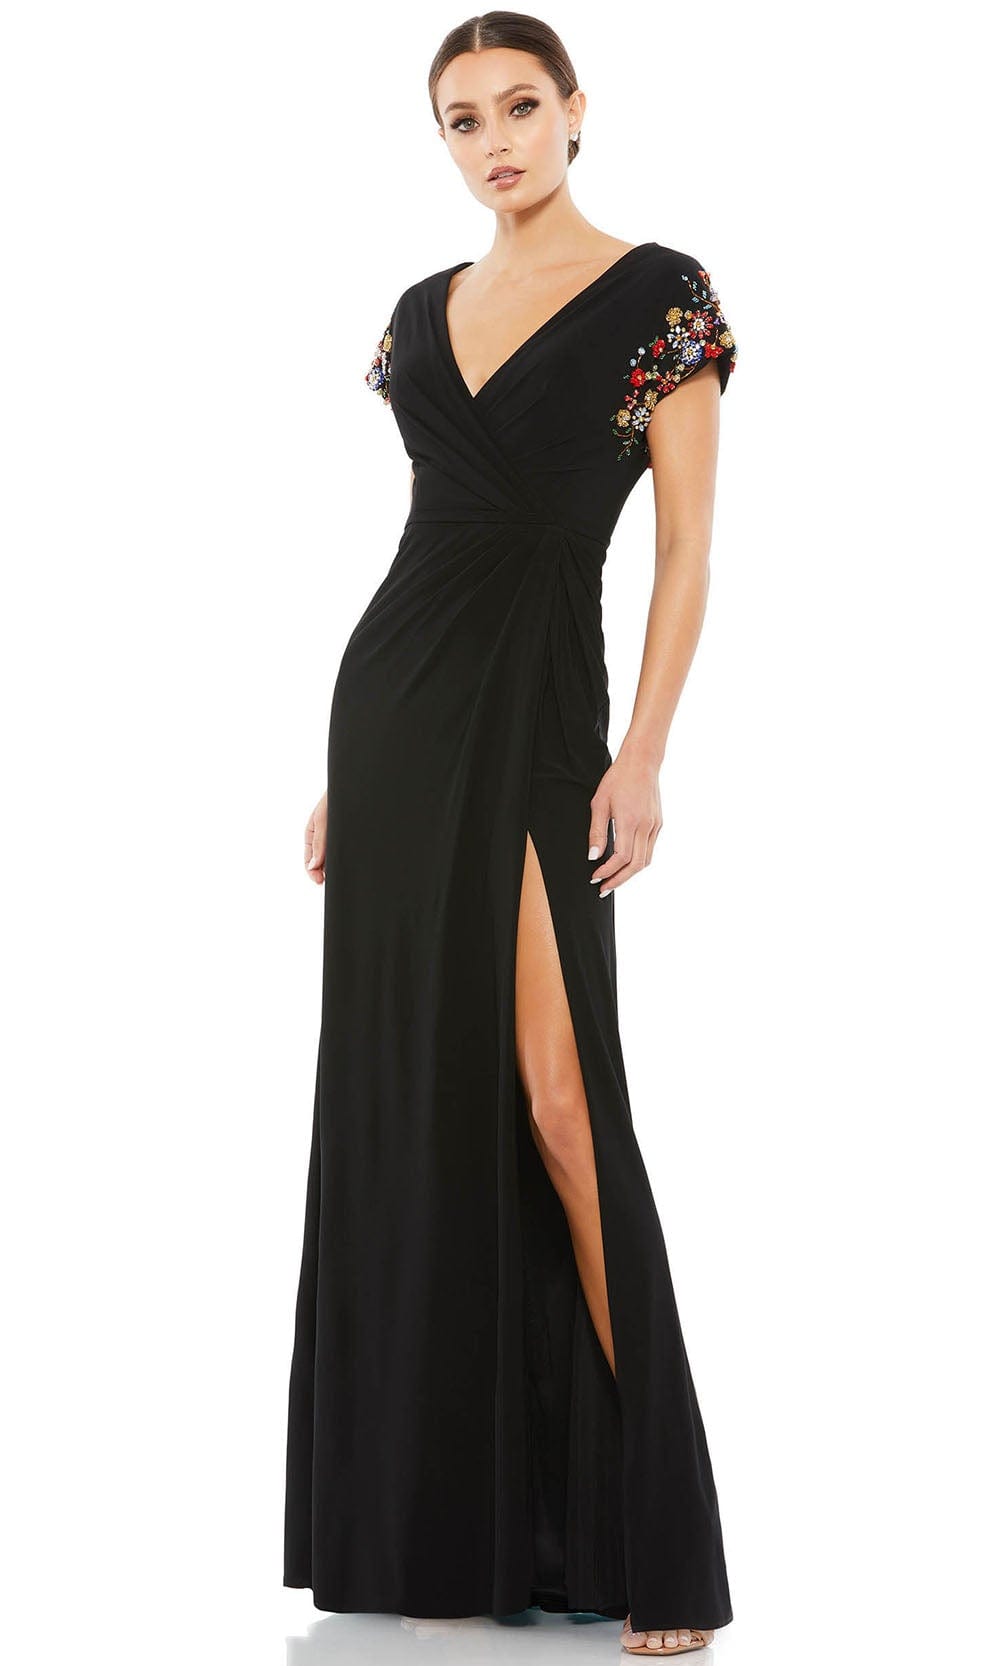 Mac Duggal 55709 - Floral Beaded Evening Gown | Couture Candy Special Occasion Dress 0 / Black Multi